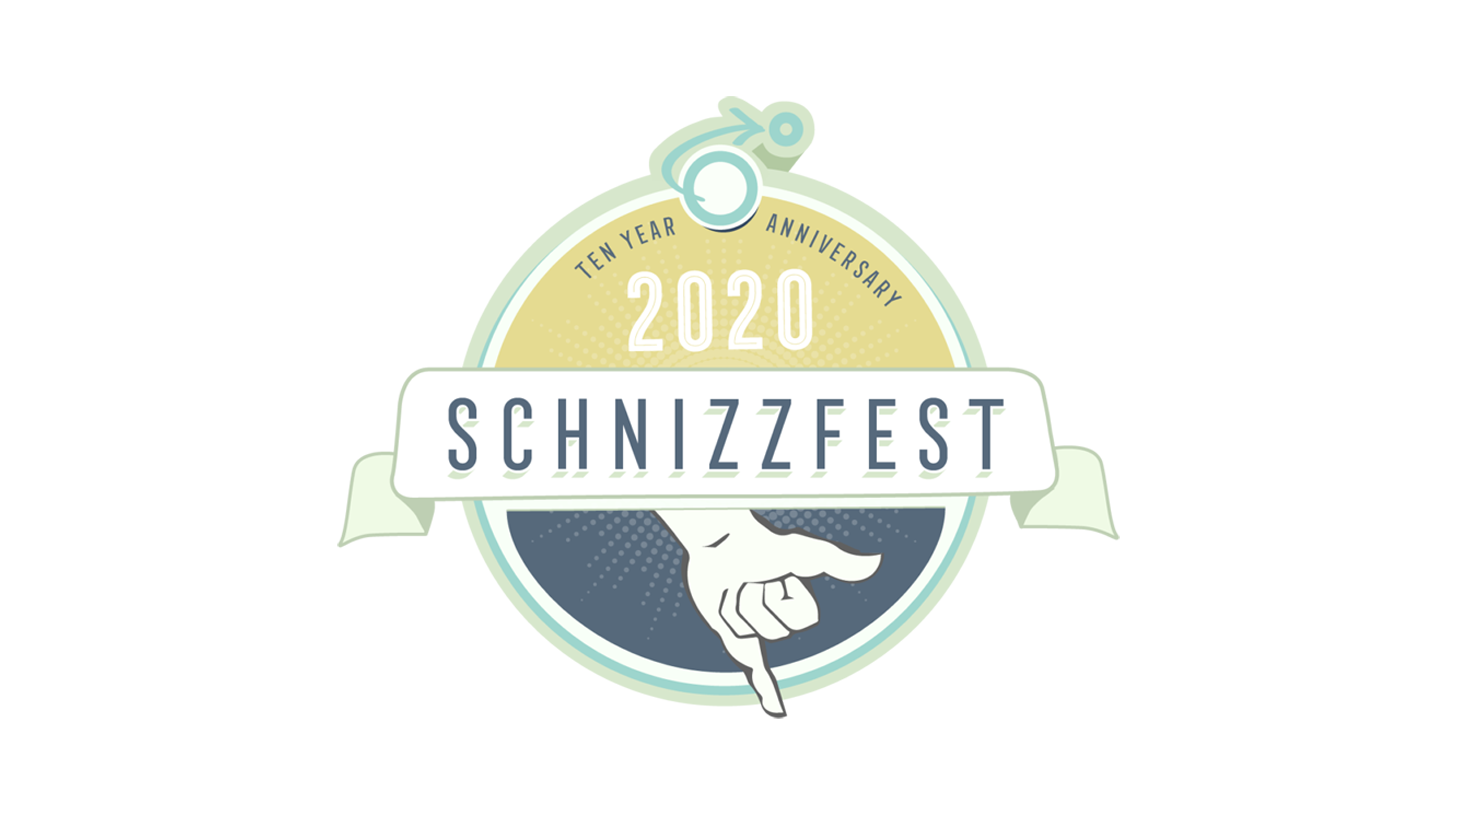 What’s New at Schnizzfest? 3 Tracks of ‘Pure Schnizzfest Awesomeness’